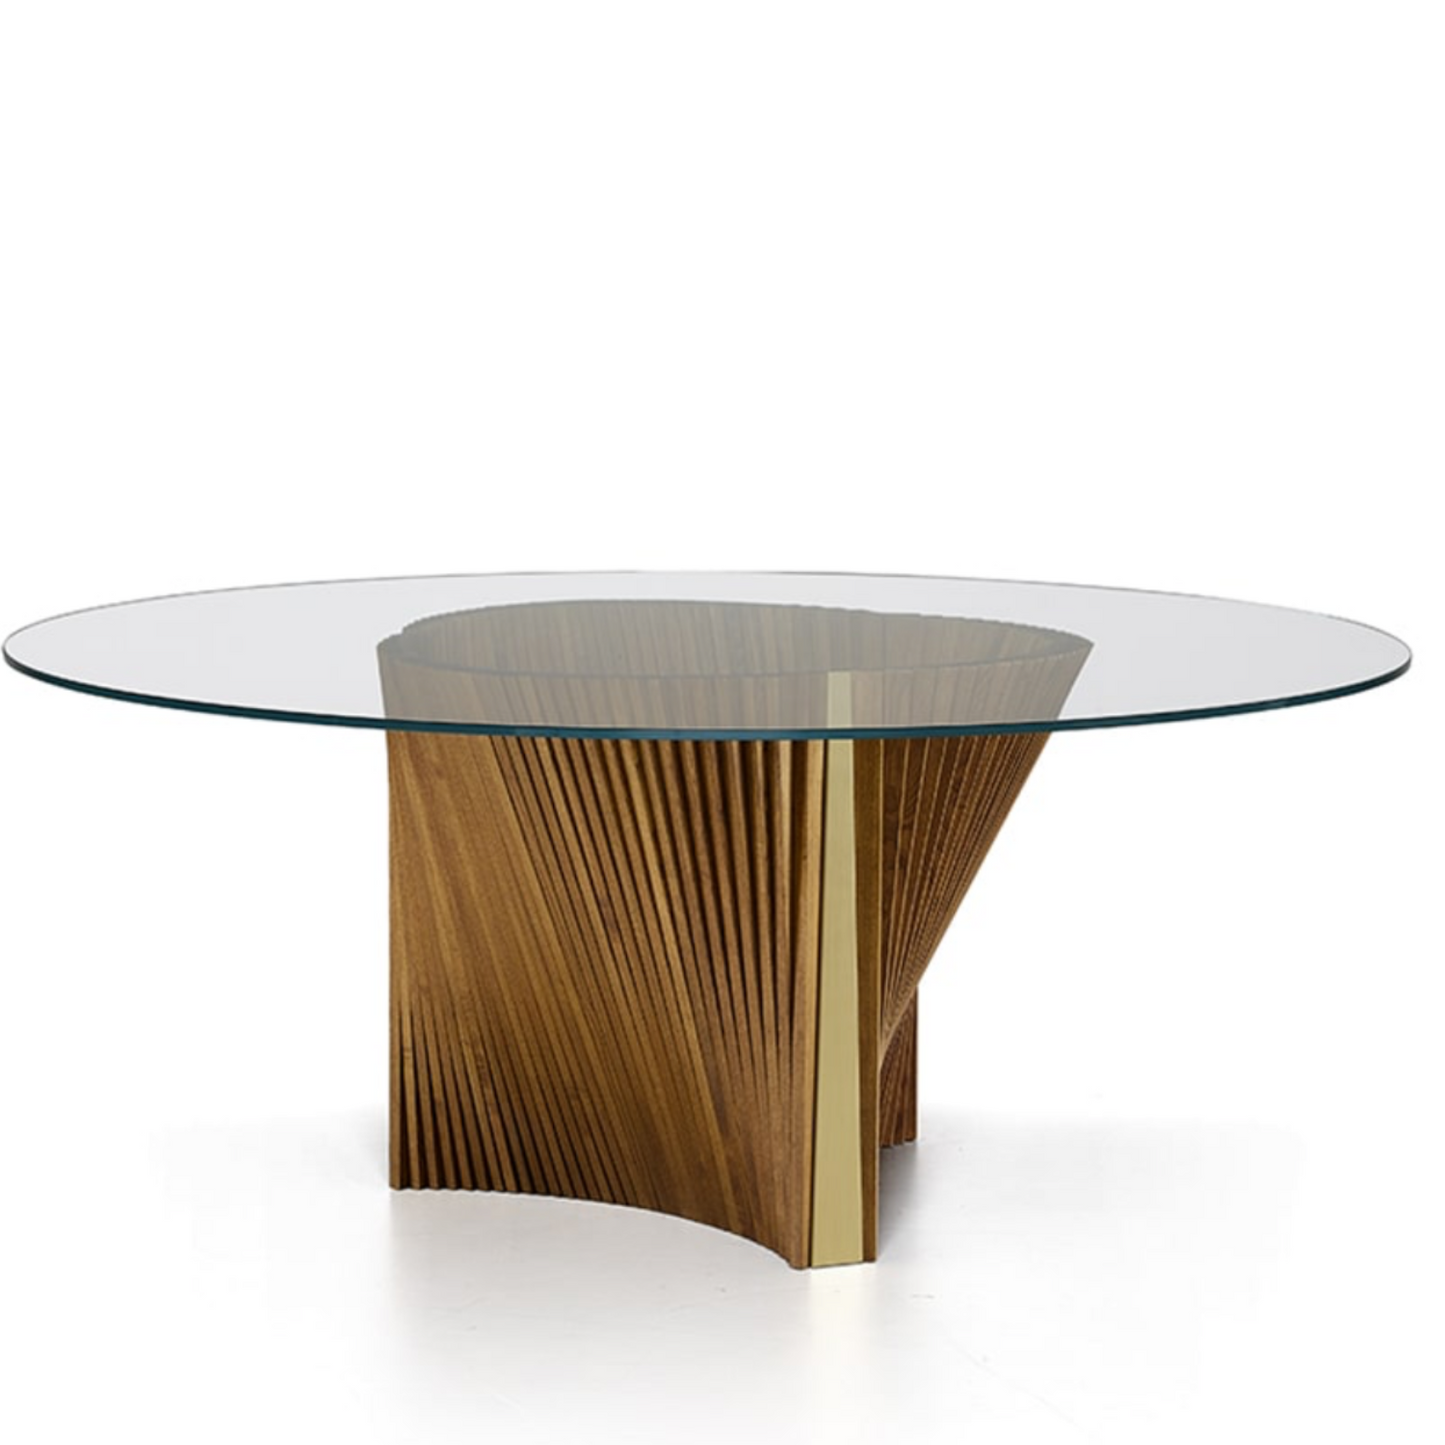 Clover Reverse Table by Natisa